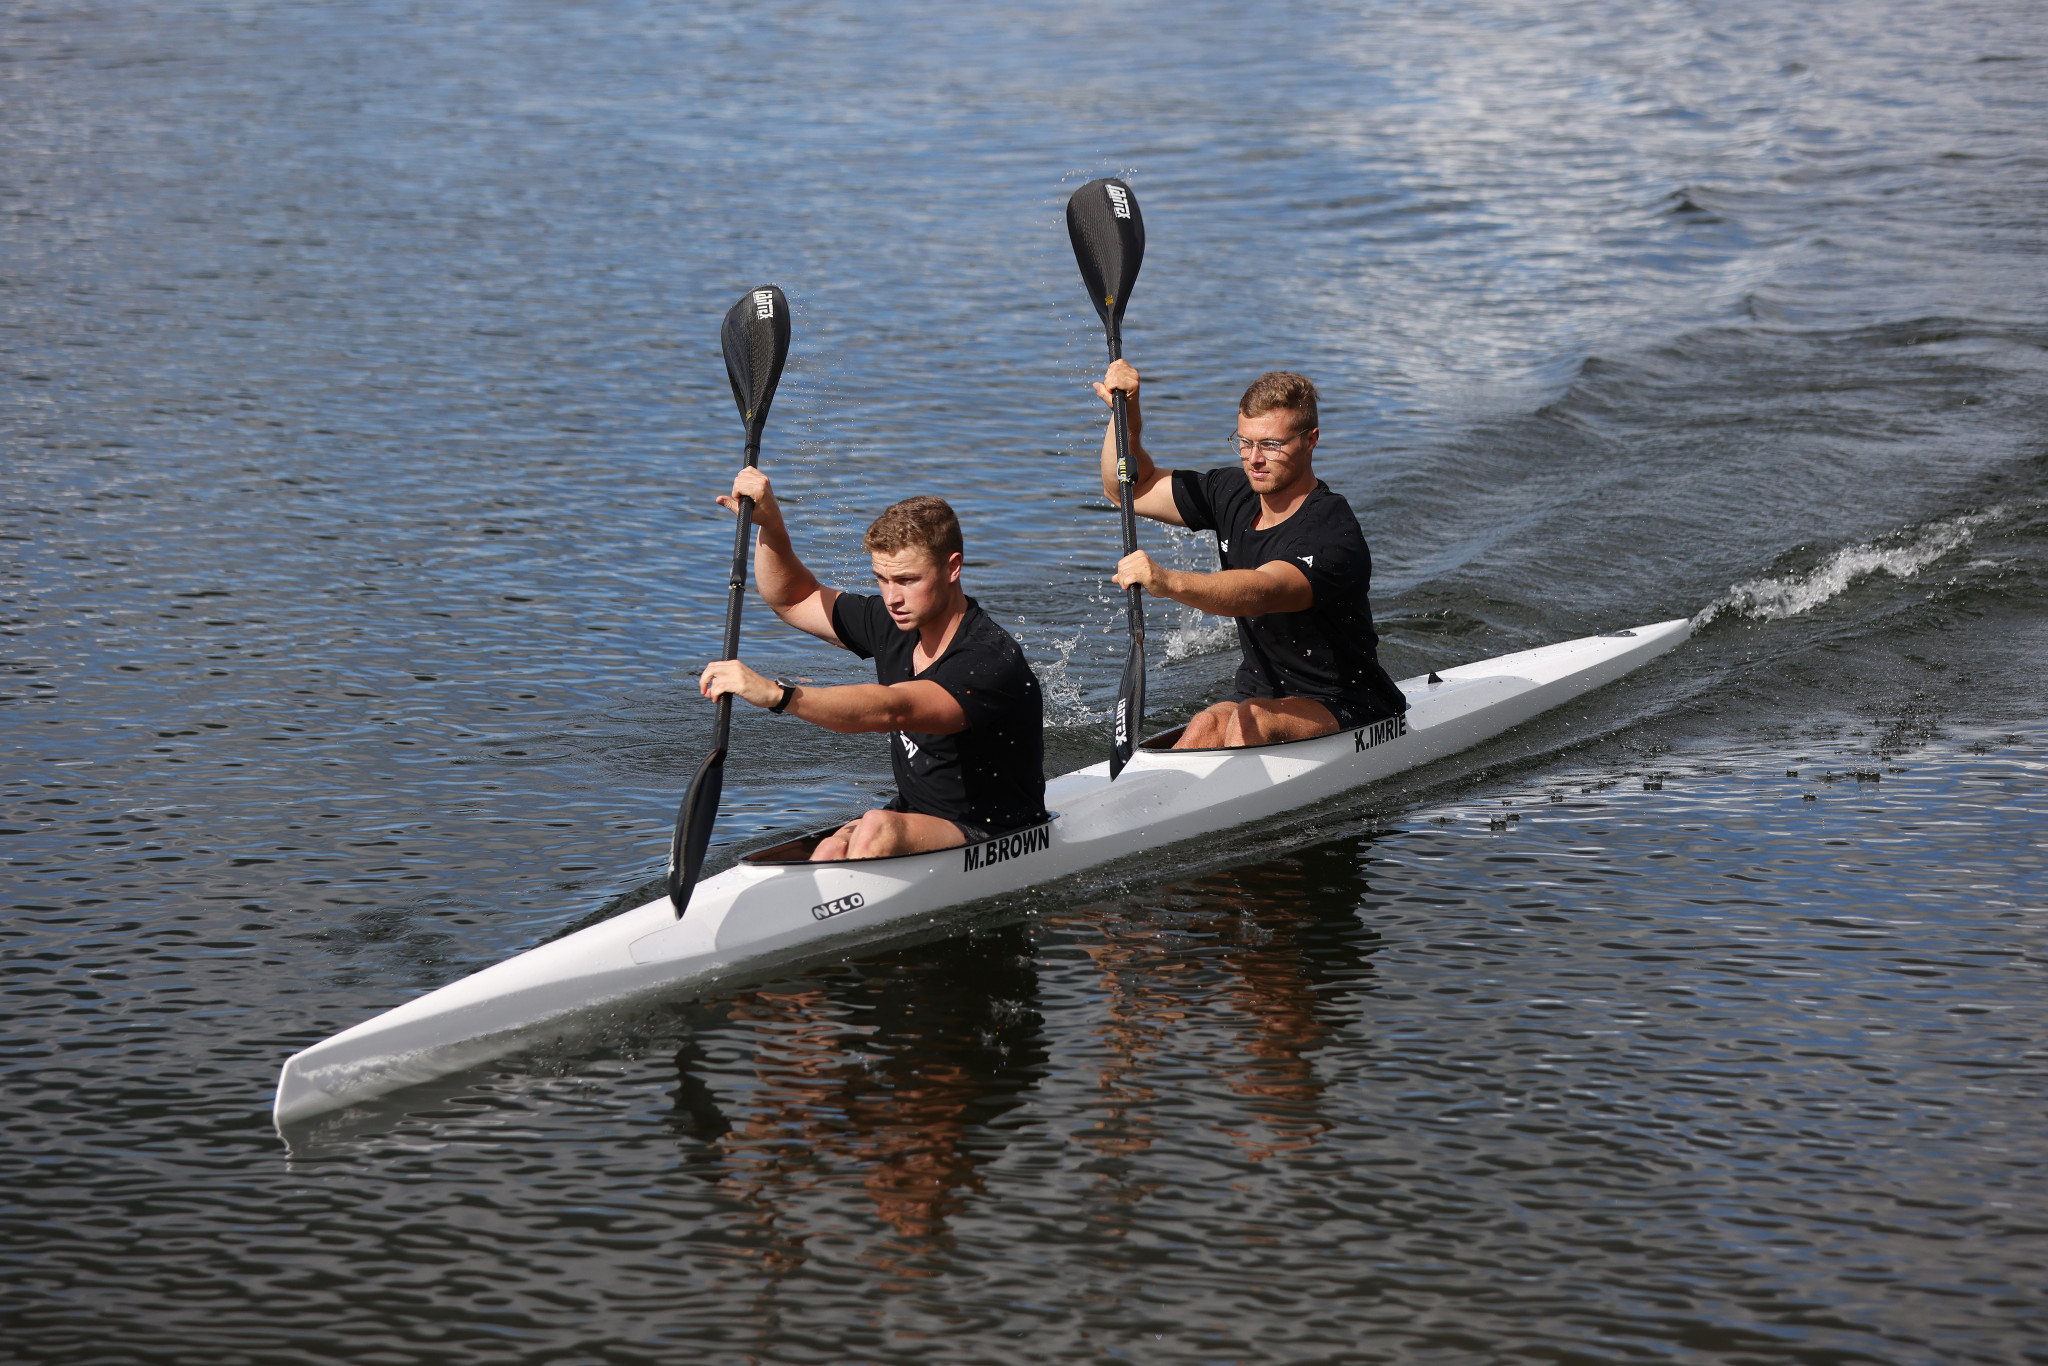 Max Brown and Kurtis Imrie qualified a New Zealand boat for the Olympics at the 2020 Oceania Championships ©Getty Images